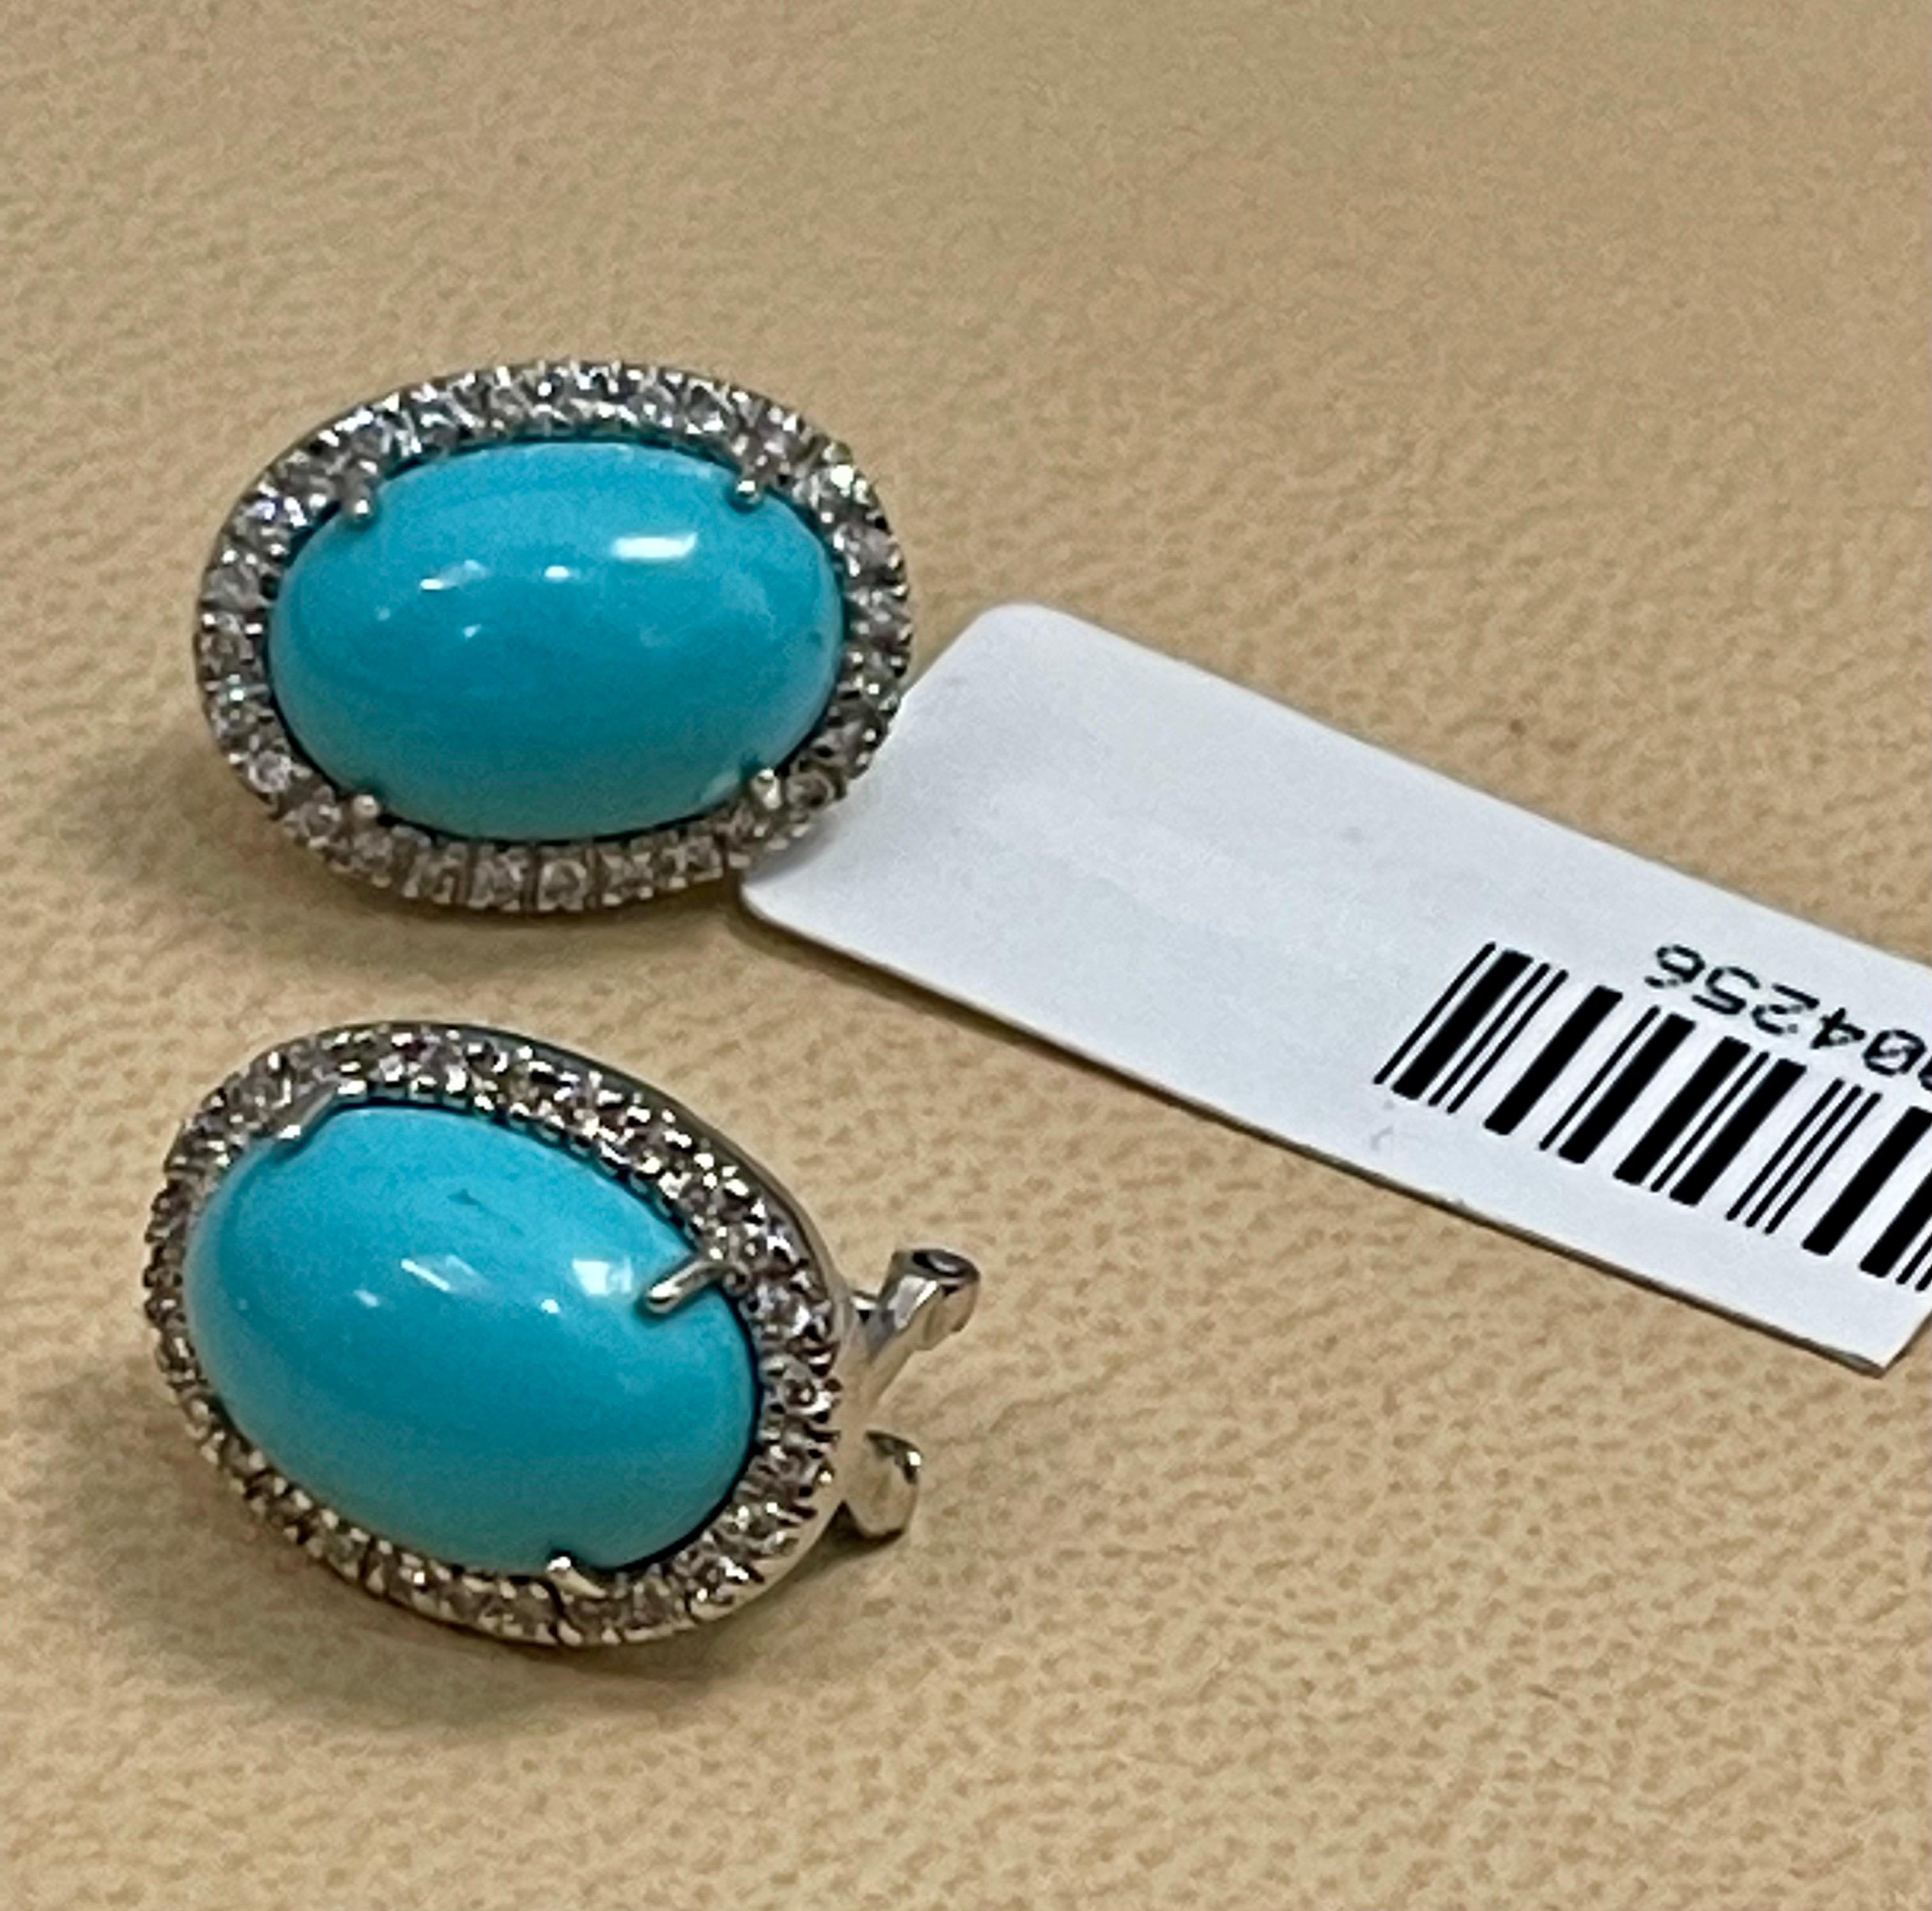 Approximately 10 Ct Oval Turquoise And Diamond Stud Earring With Omega Back ,14 Karat White Gold
Each turquoise about 4.5 to 5 carat each.
Very desirable color and quality.
perfect pair made in 14 Karat White gold
Gold 6.5 Grams including